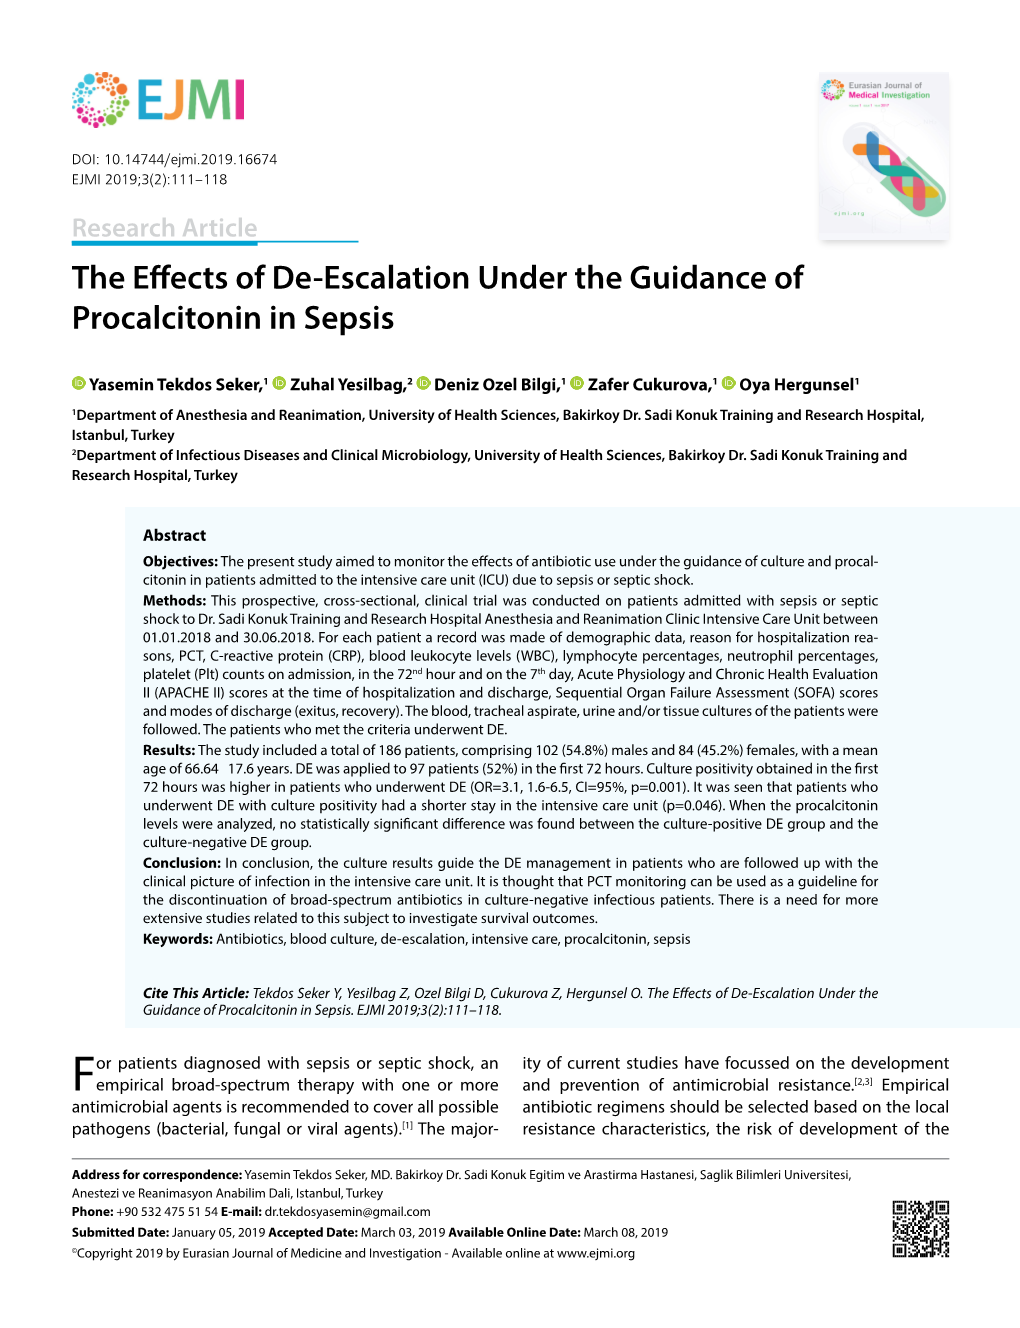 The Effects of De-Escalation Under the Guidance of Procalcitonin in Sepsis